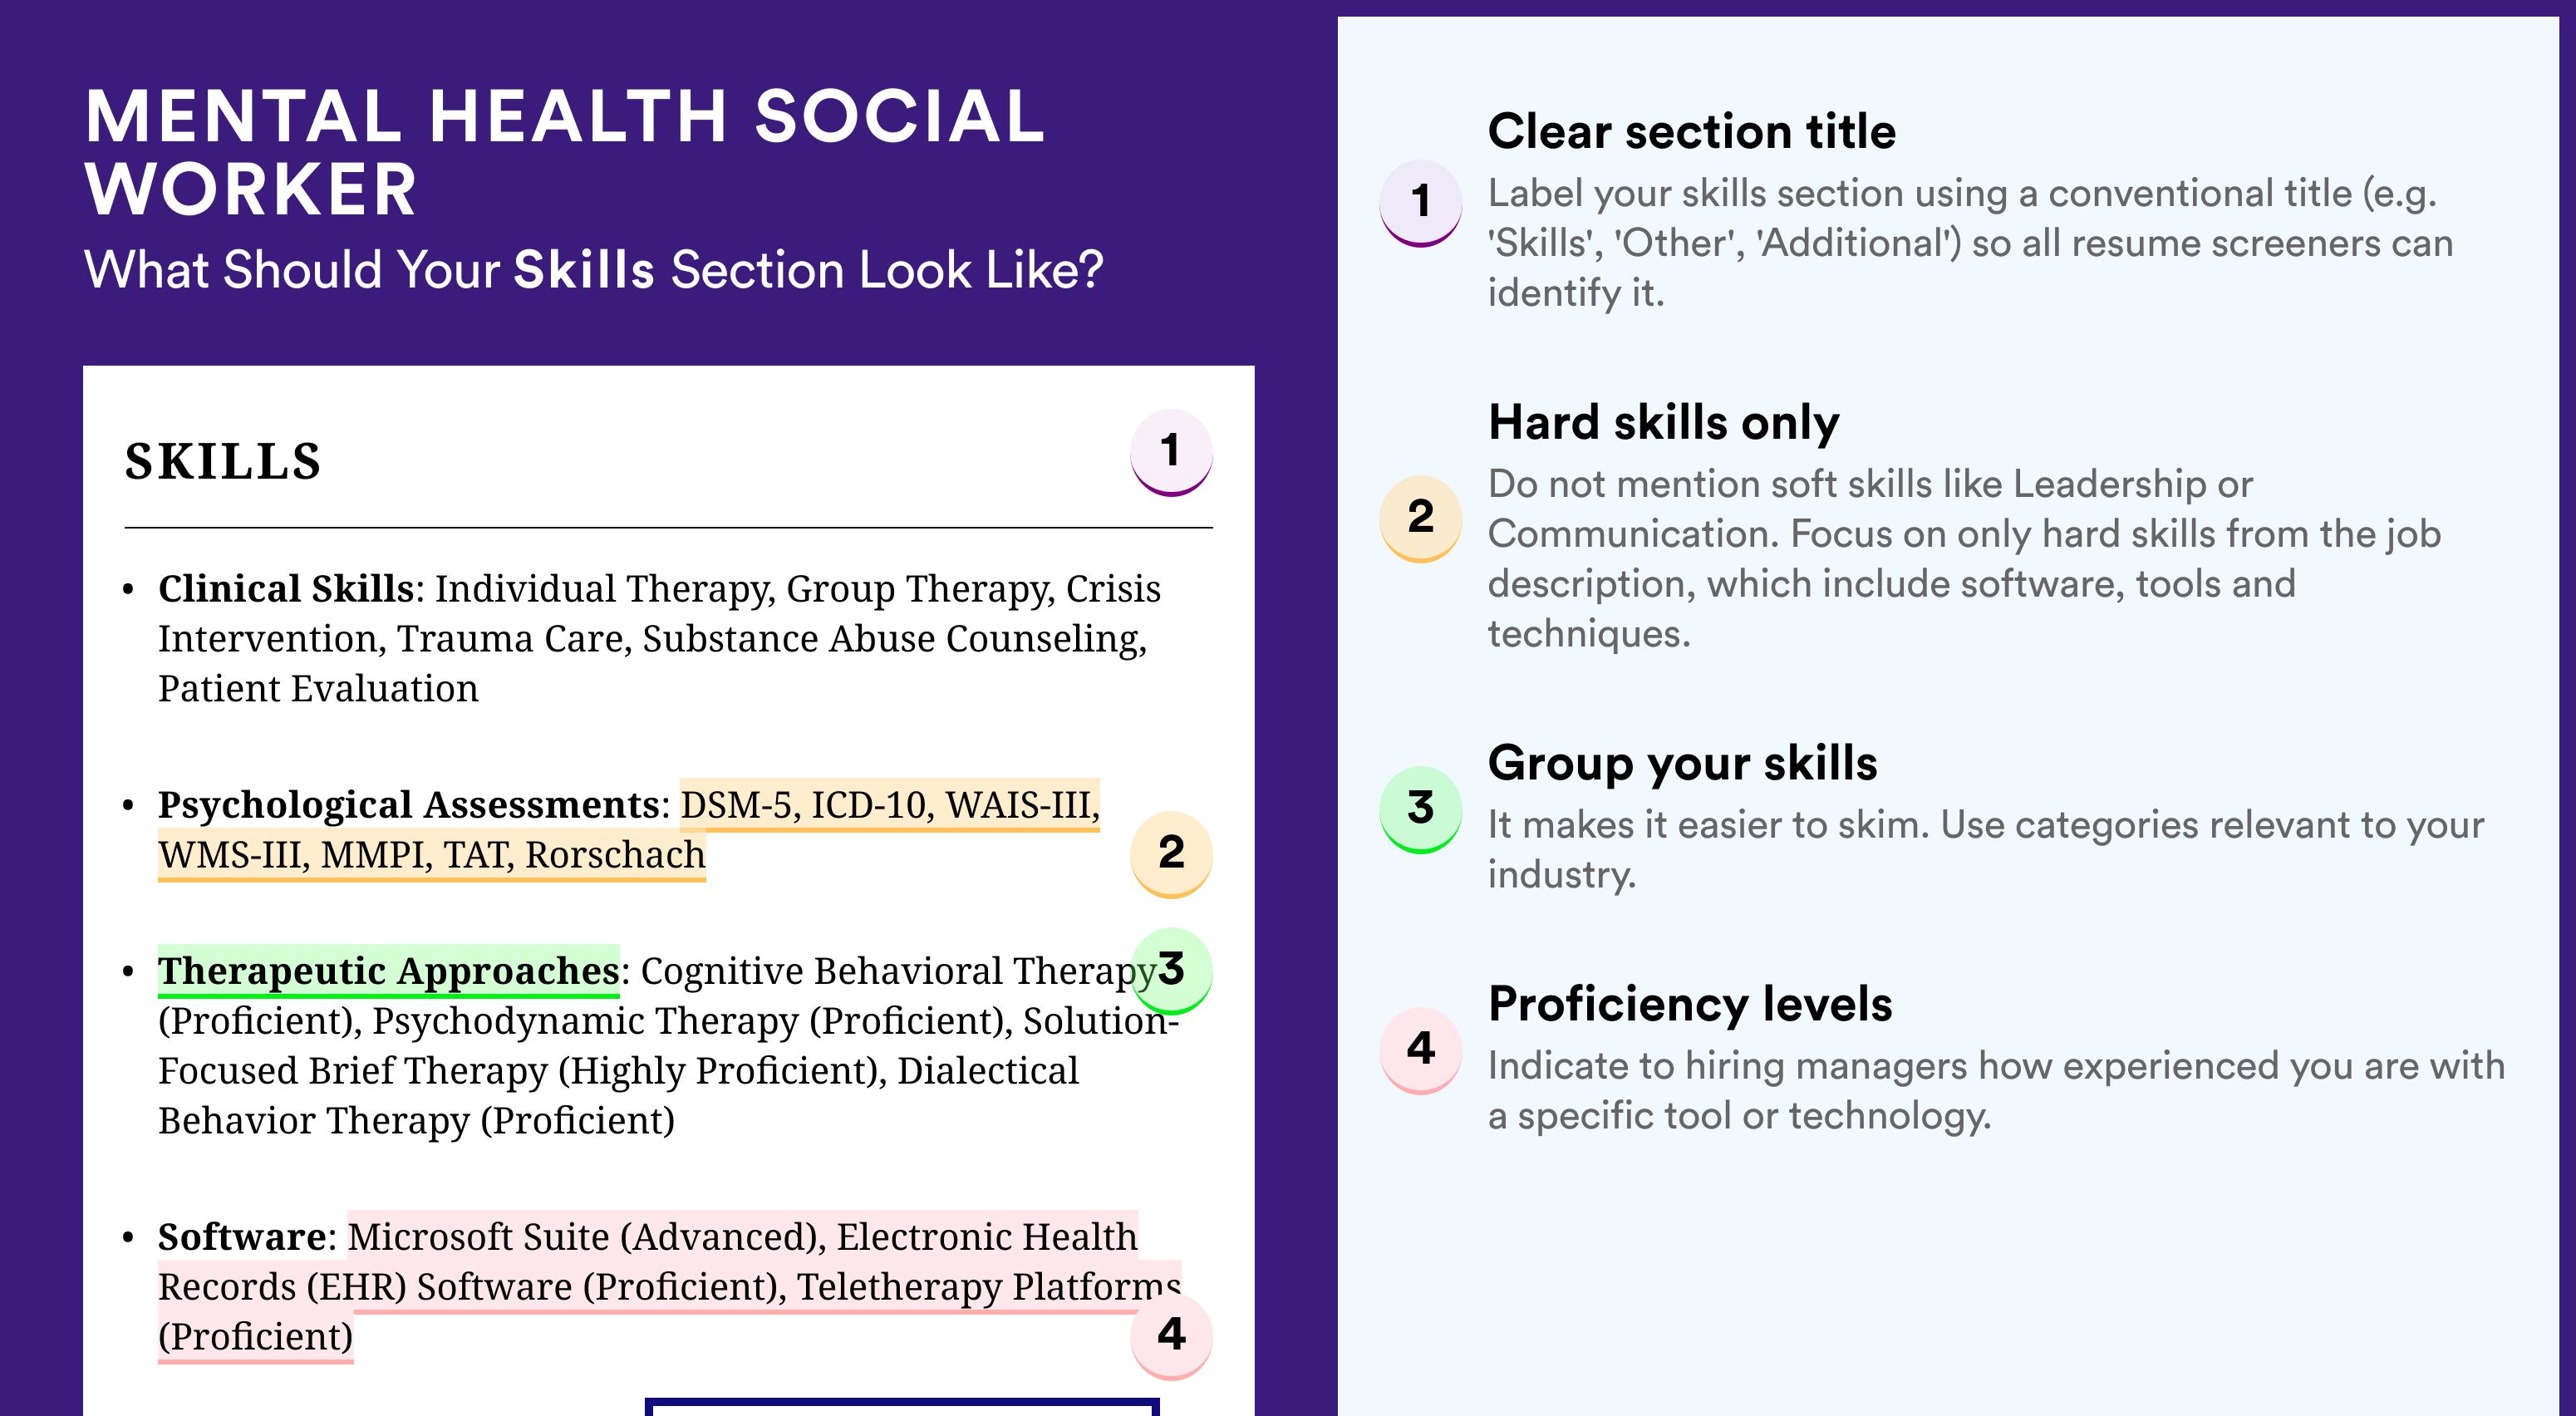 How To Write Your Skills Section - Mental Health Social Worker Roles